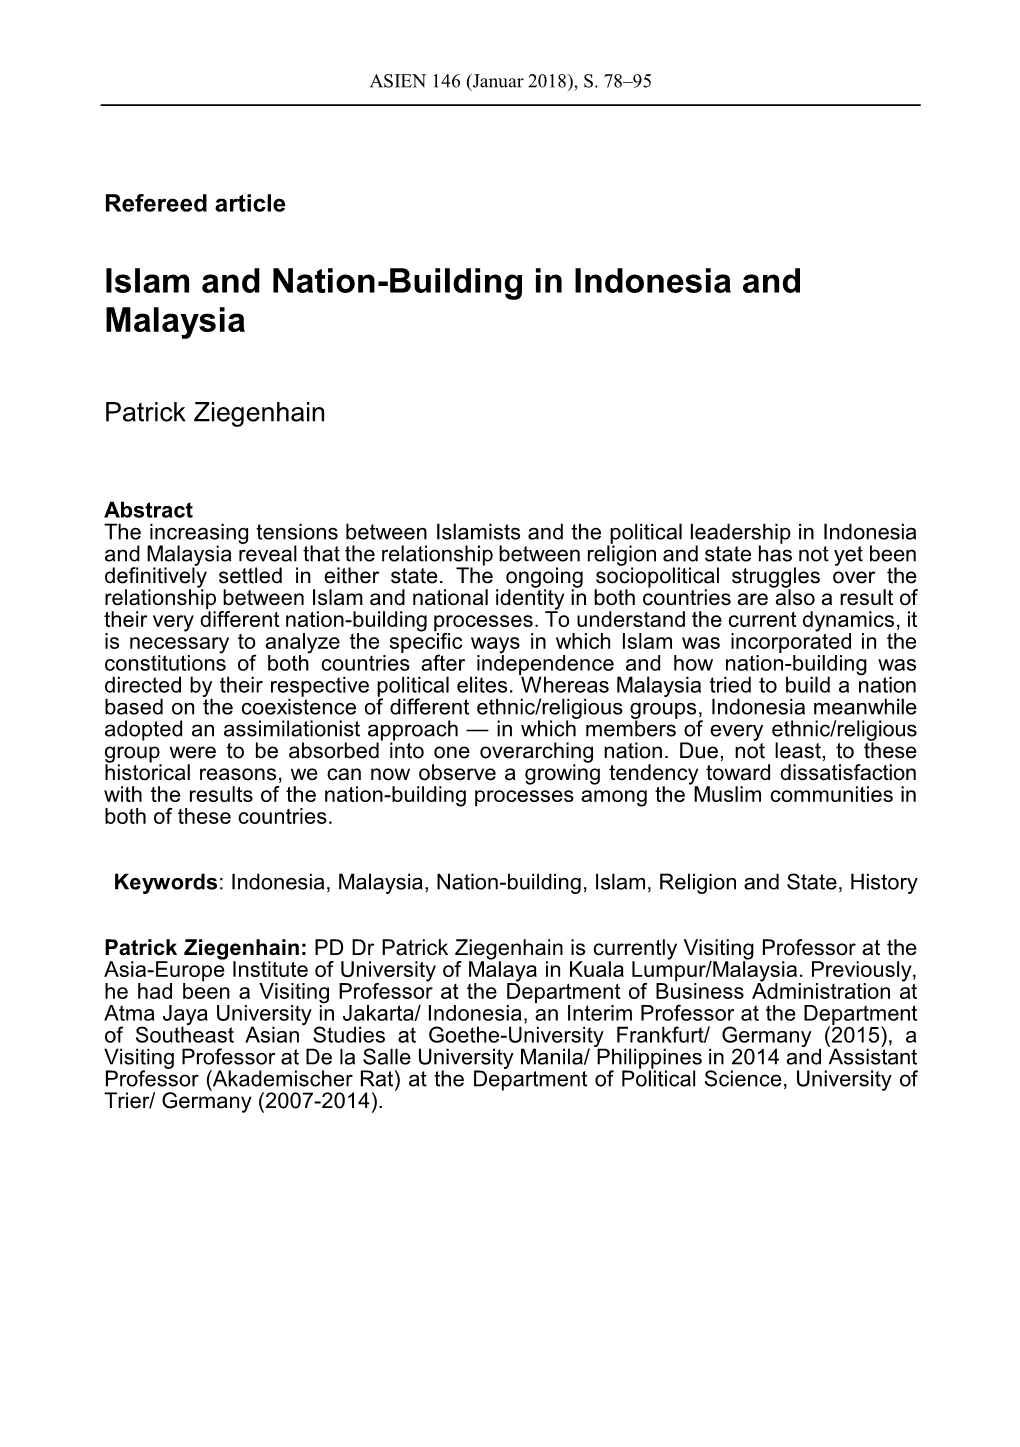 Islam and Nation-Building in Indonesia and Malaysia